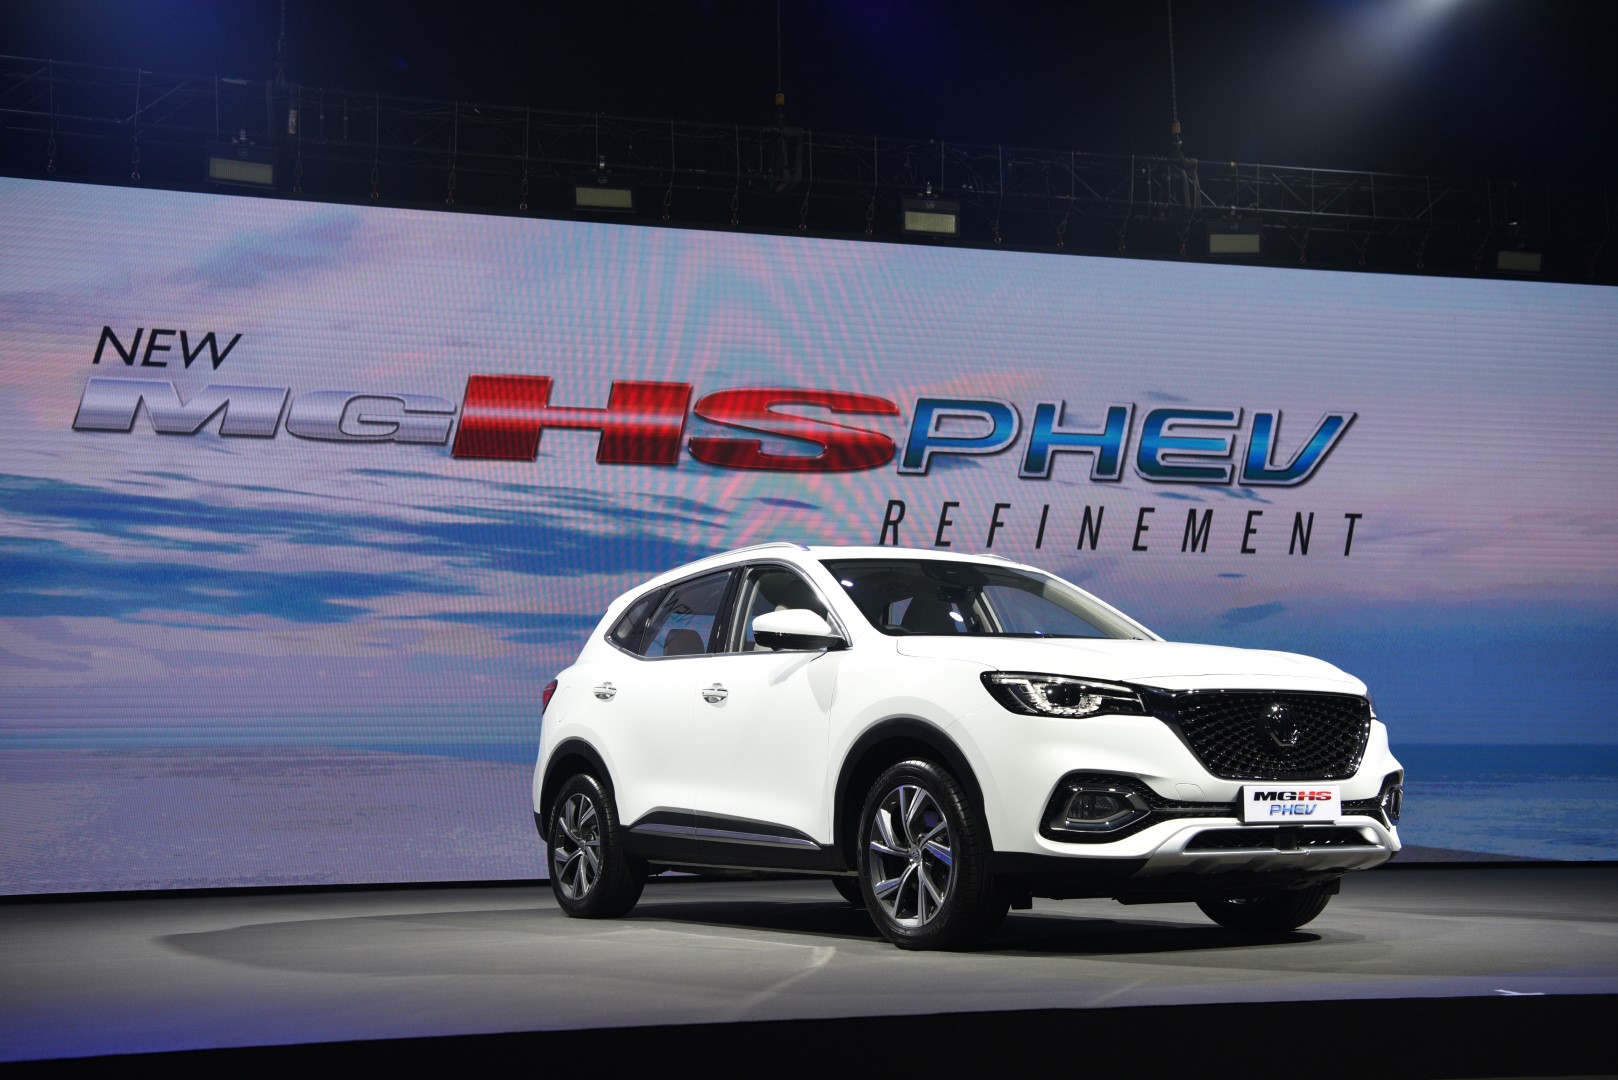 MG Launches NEW MG HS PHEV to Drive Every Value of Life in “REFINEMENT” New  Model Comes with Plug-in Hybrid That Promises to Make Its Owners Proud